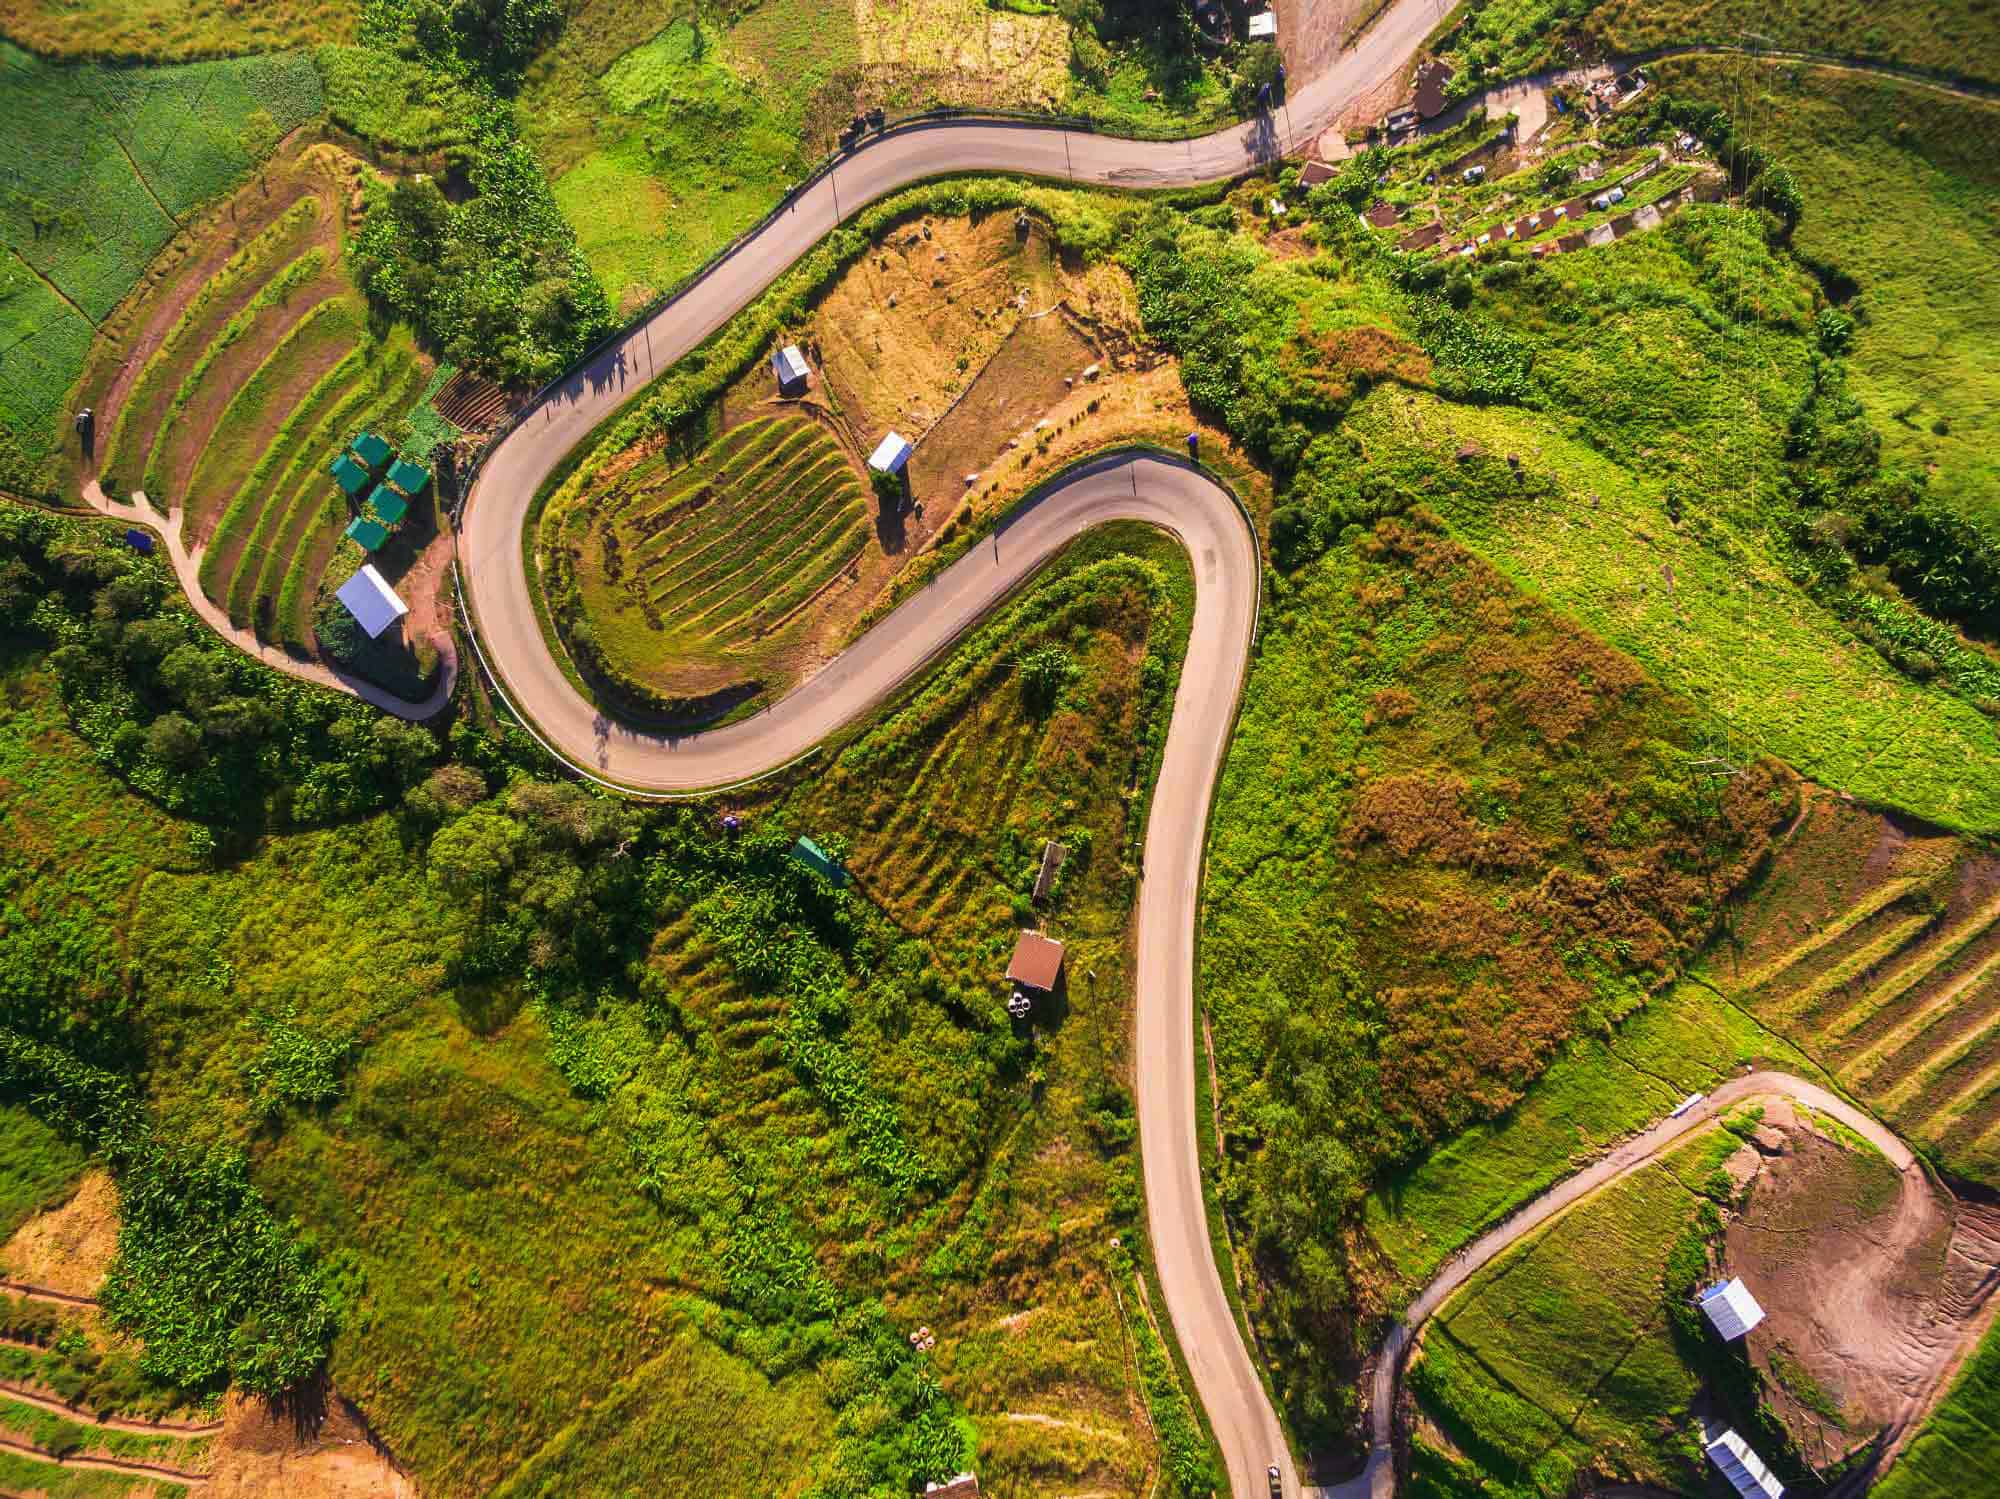 Aerial view of a winding road through lush green agricultural fields.